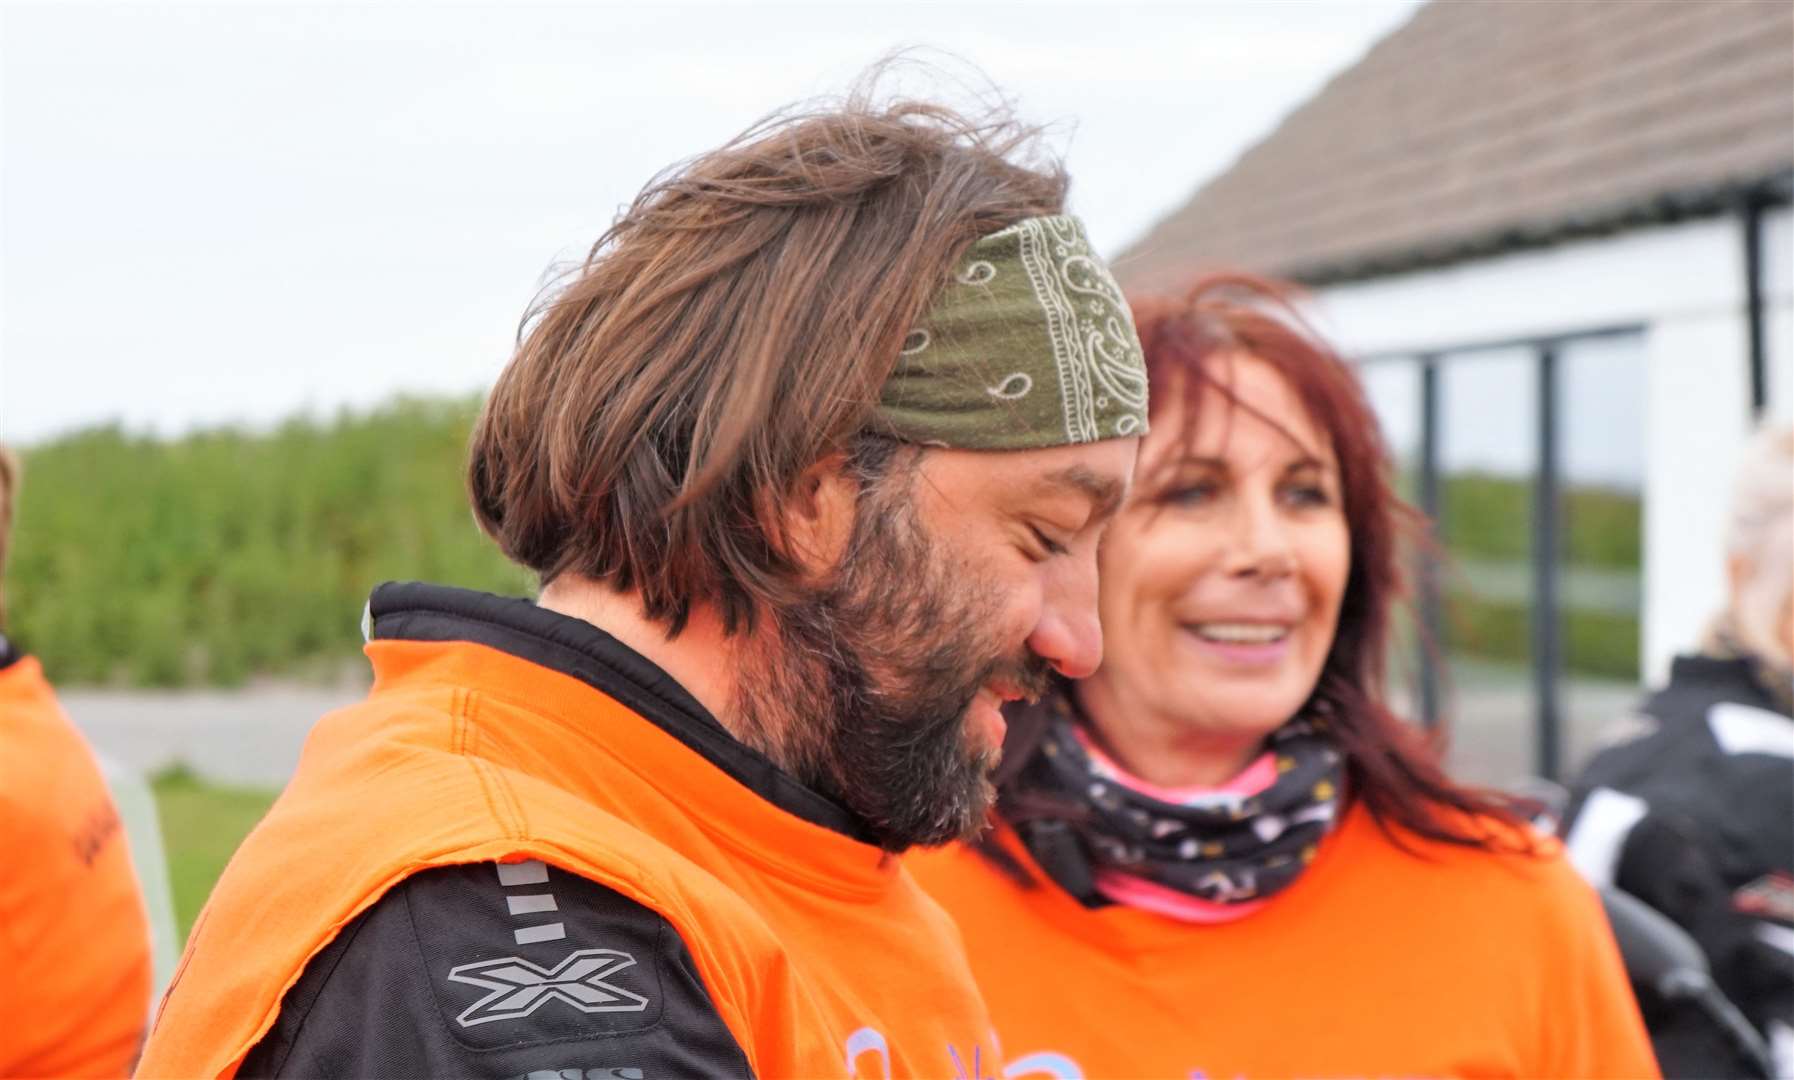 Victor David, the man behind the charity run from Land's End in memory of his mother and to raise research funds.